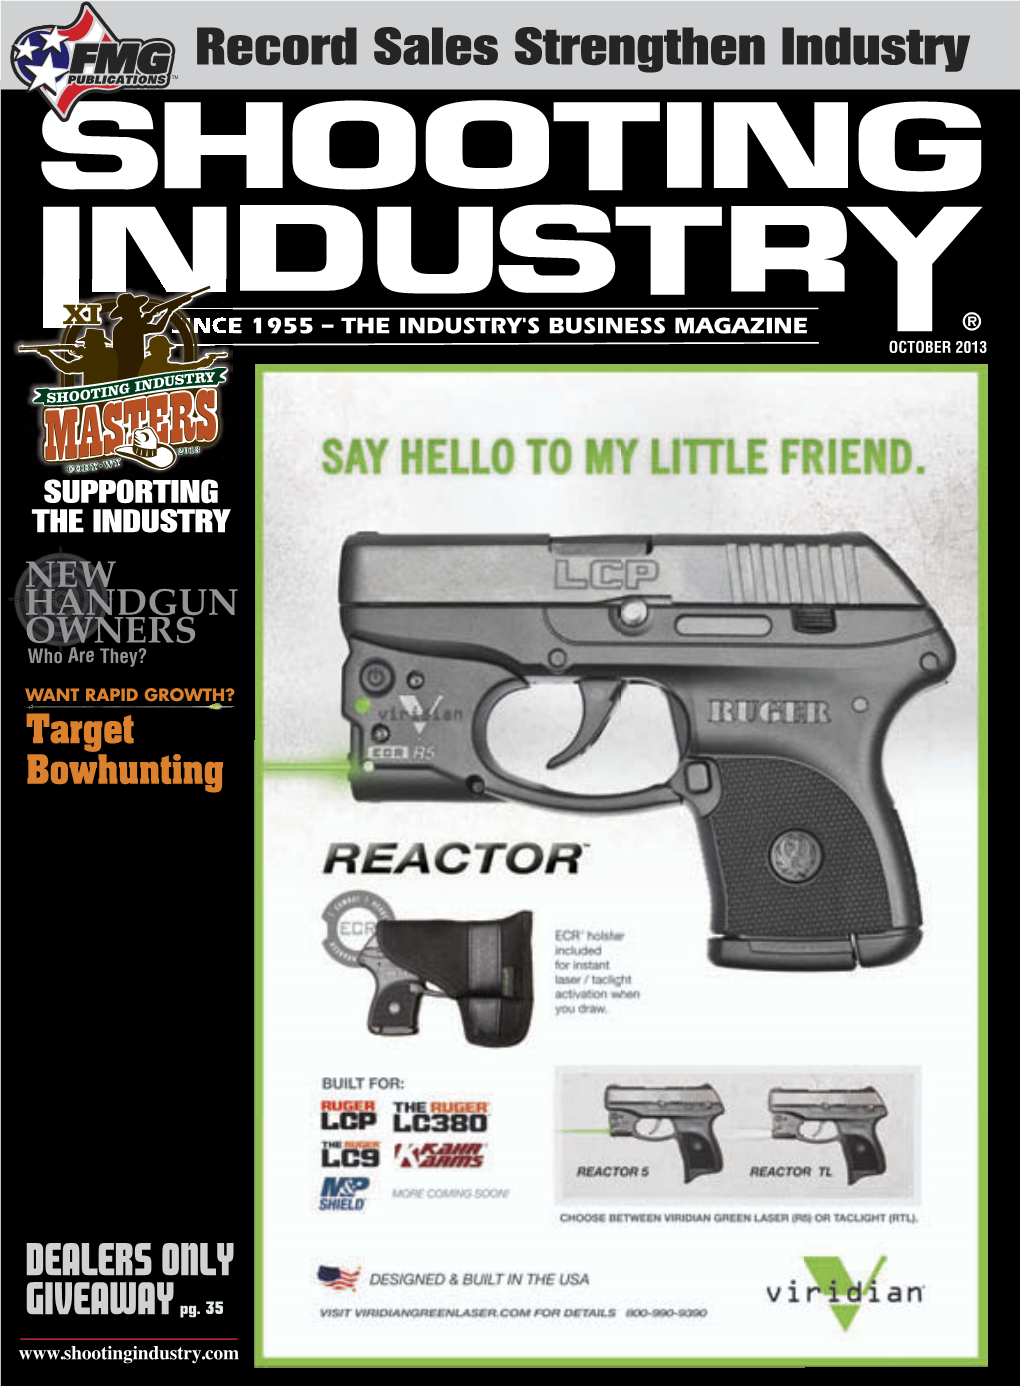 SHOOTING INDUSTRY® (ISSN 0037-4148) Is Published Monthly by Publishers’ Development Corporation at 12345 World Trade Dr, San Diego, CA 92128